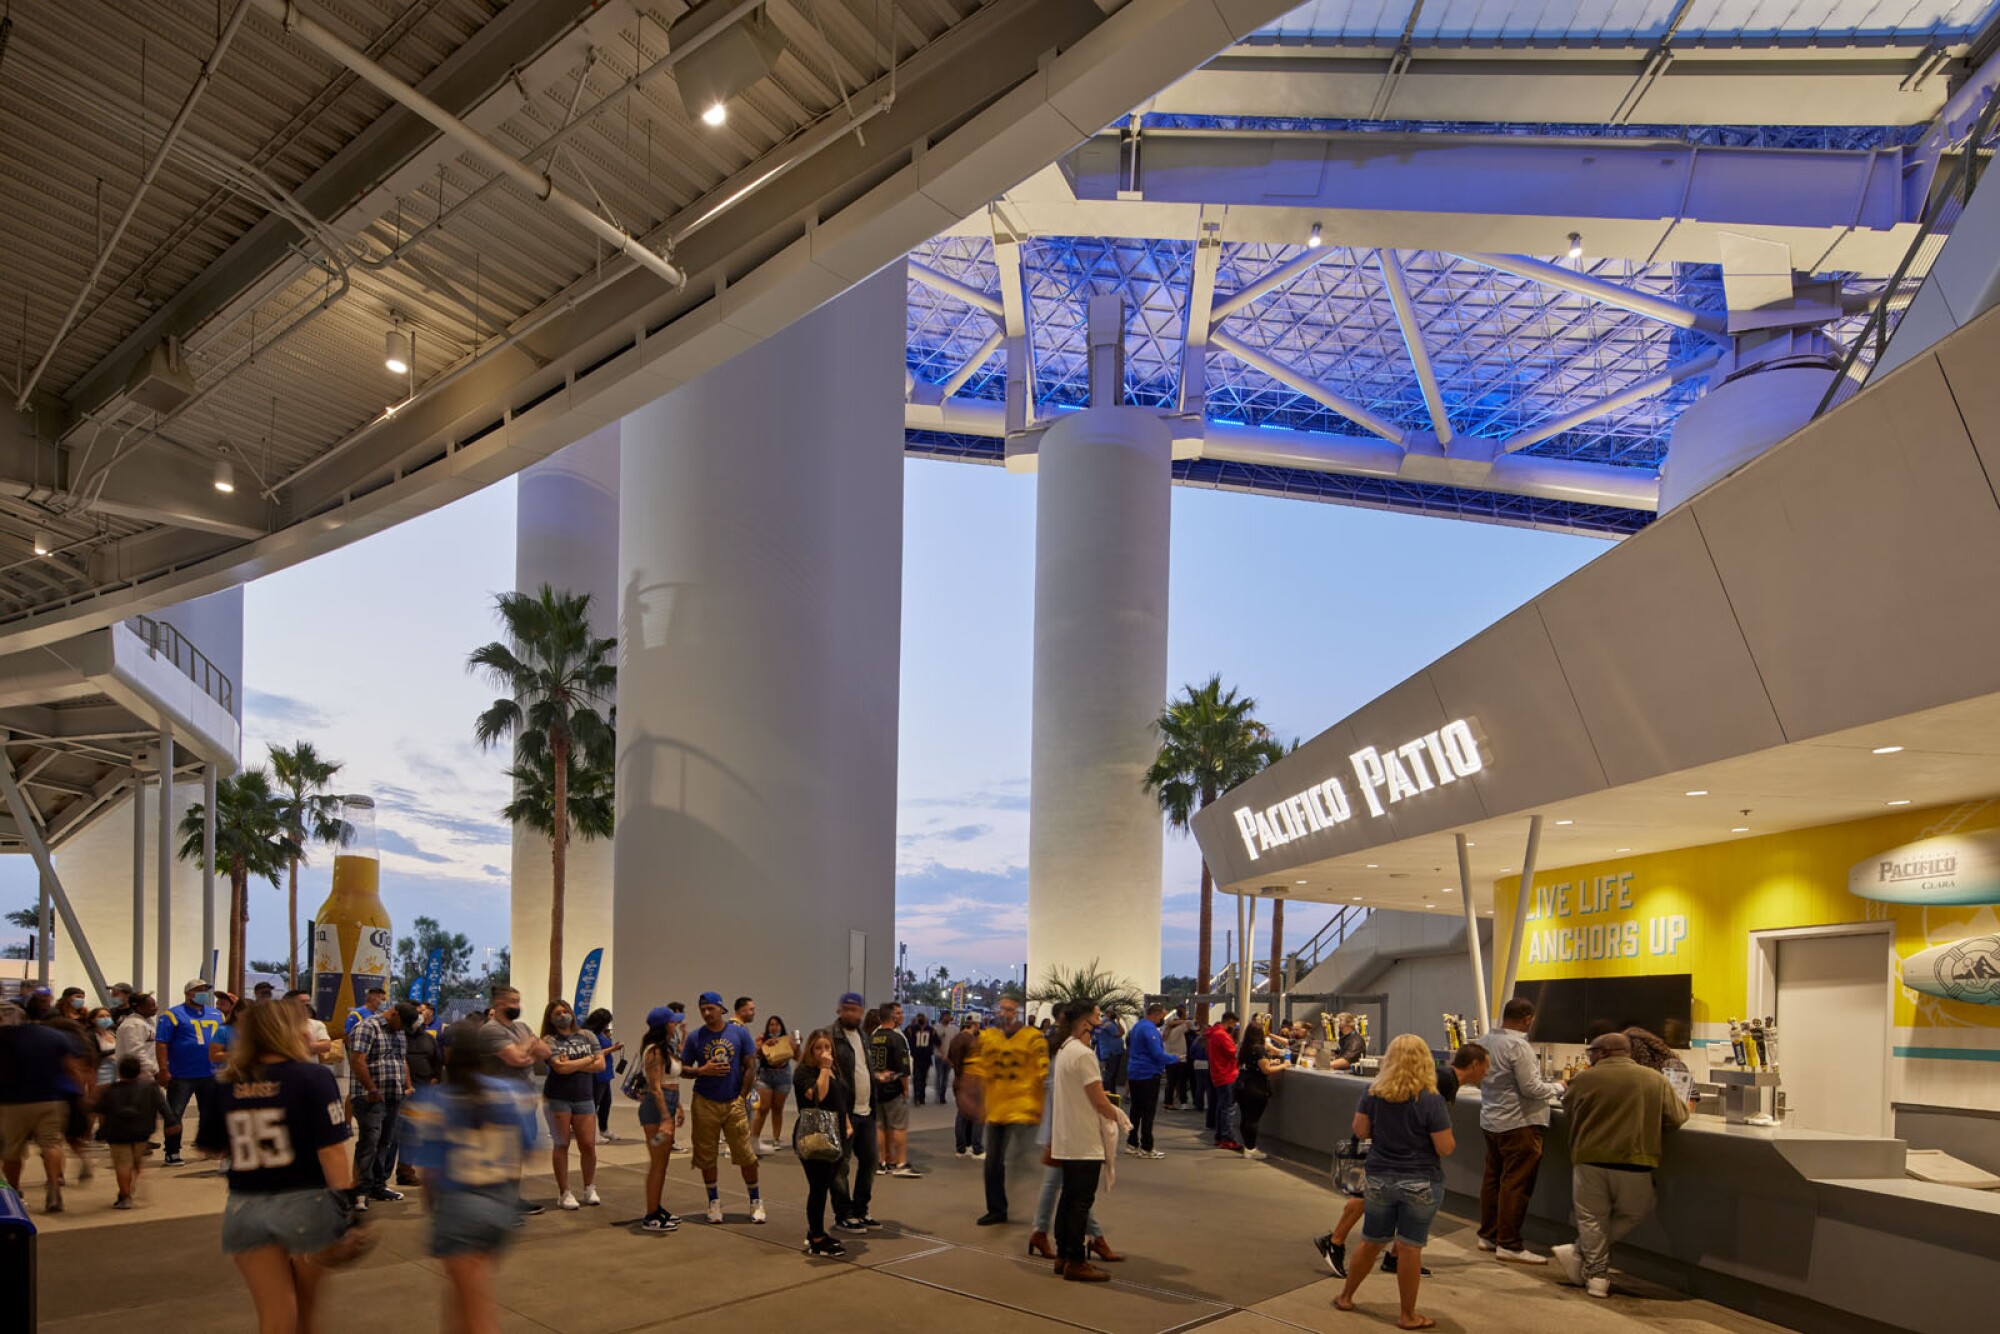 A view of an illuminated concession area on the upper concourse of SoFi at dusk.